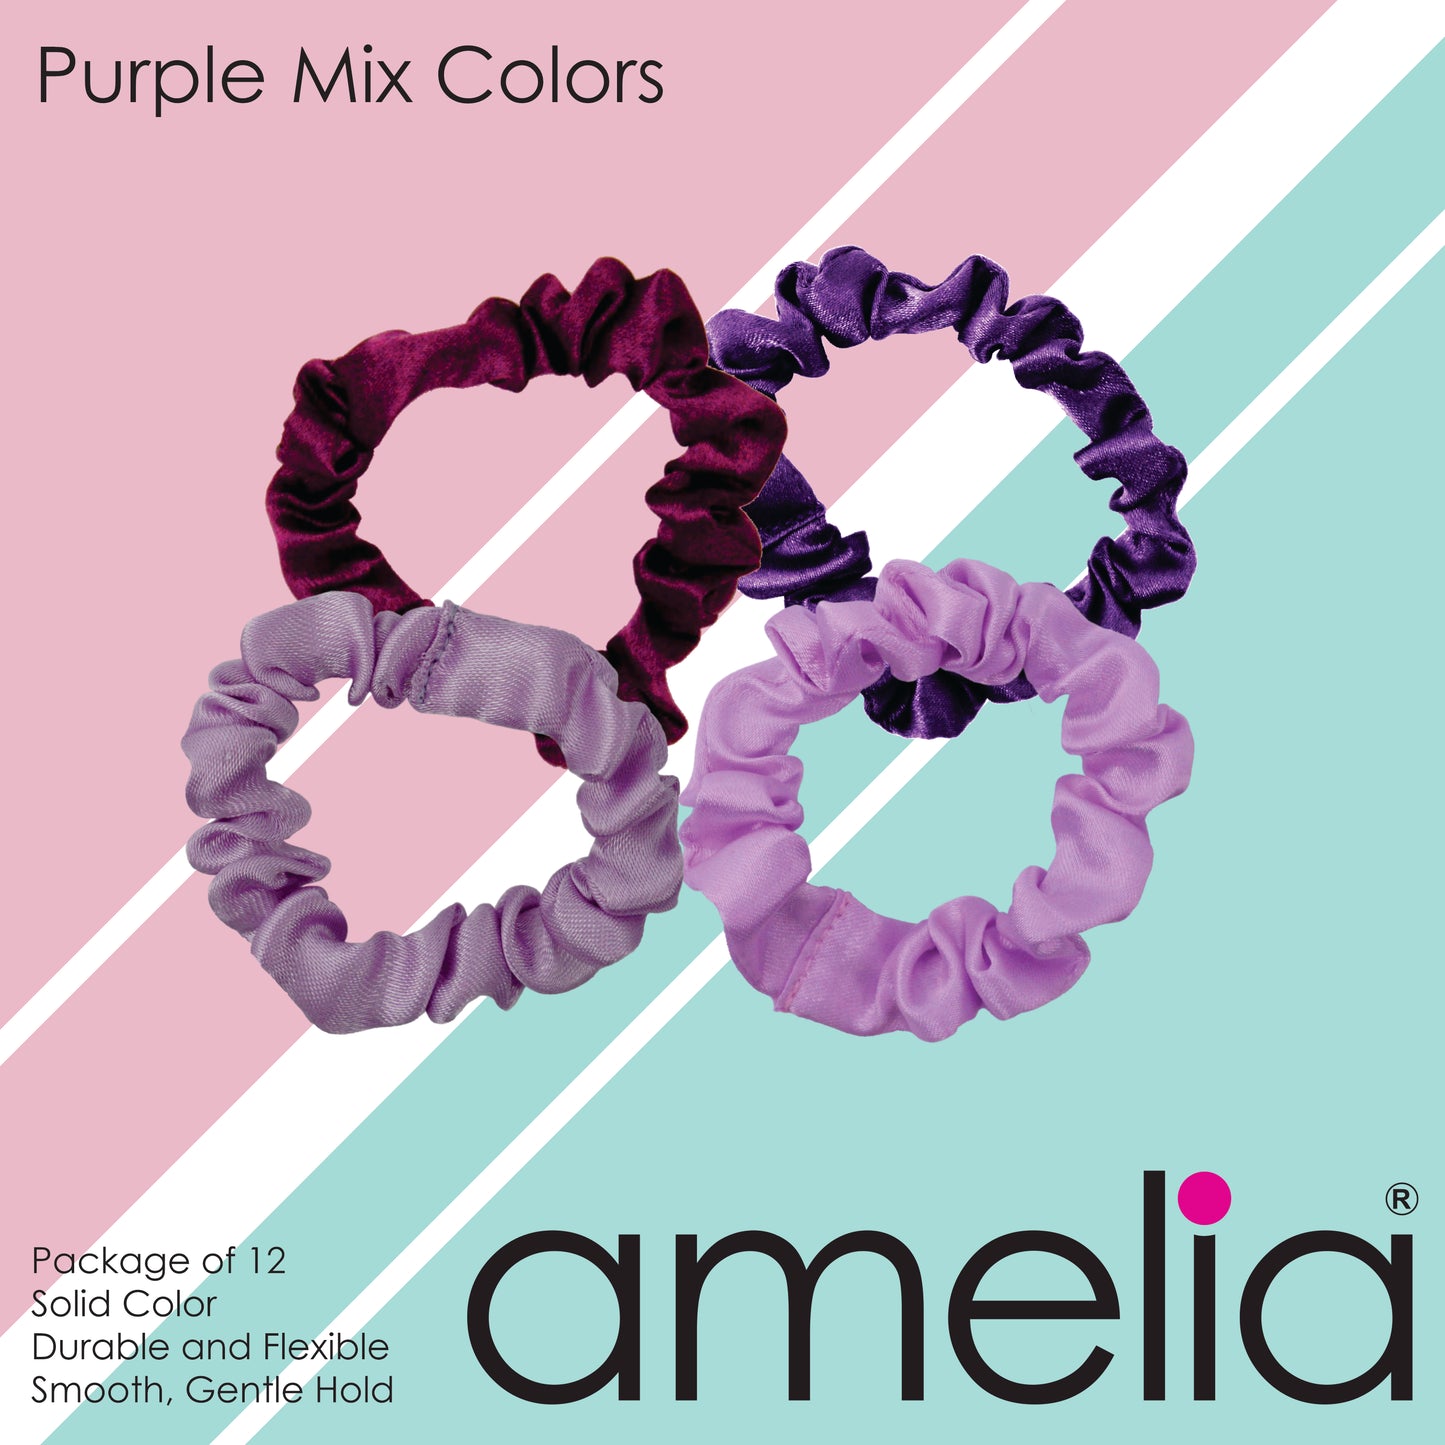 Amelia Beauty, Purple Mix Satin Scrunchies, 2.25in Diameter, Gentle on Hair, Strong Hold, No Snag, No Dents or Creases. 12 Pack